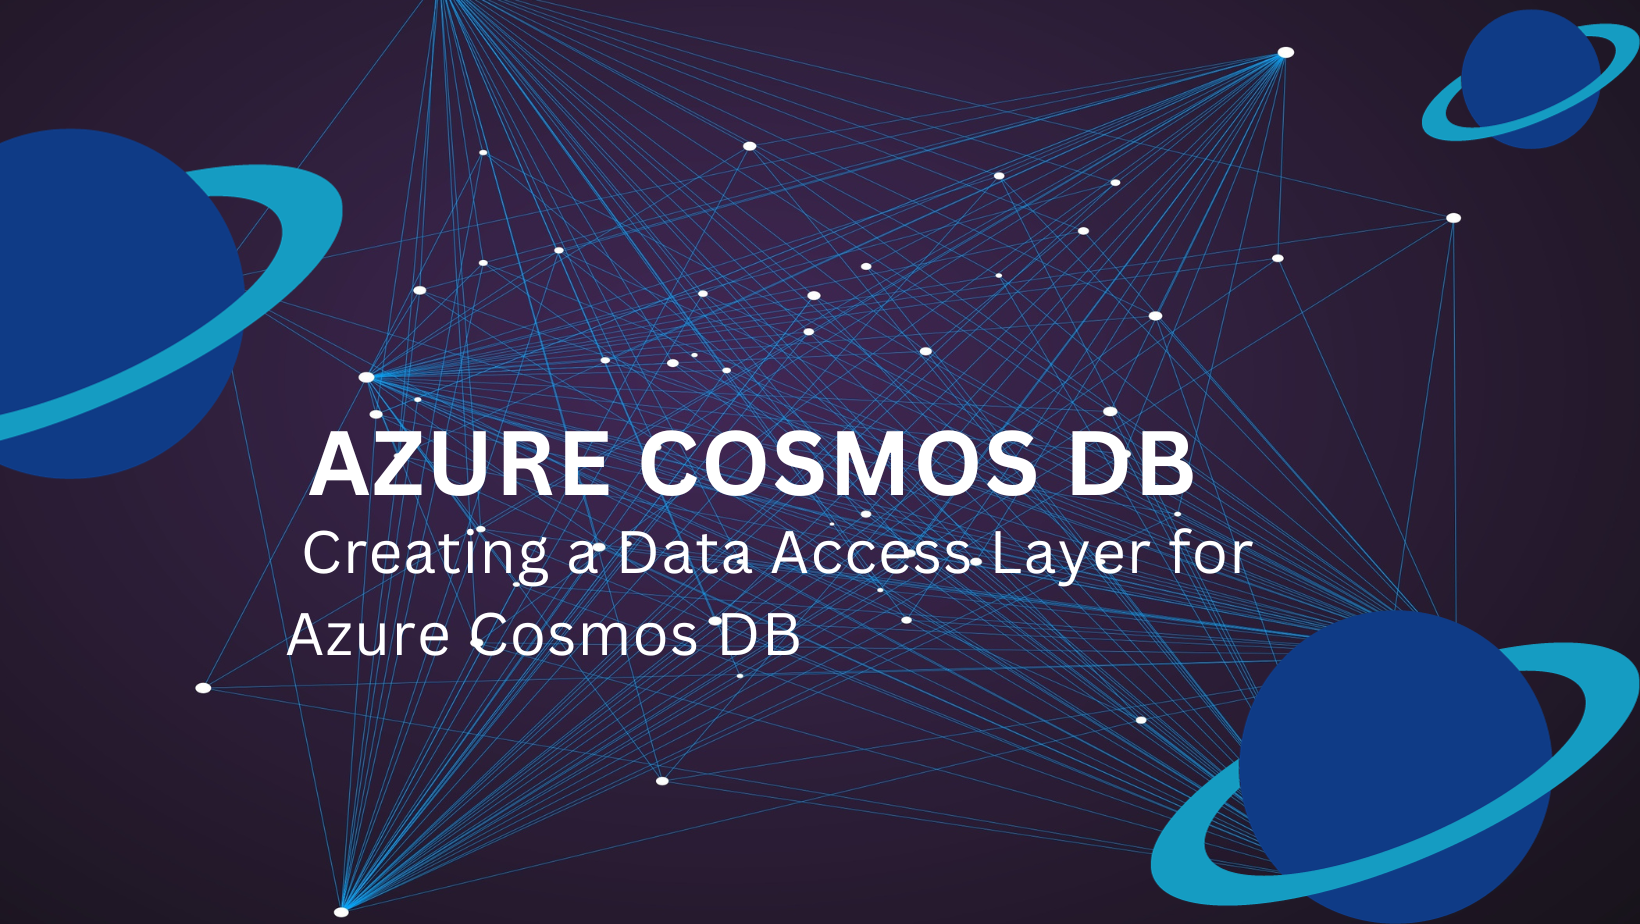 Implementing a repository pattern to create a Data Access Layer for Azure Cosmos DB.